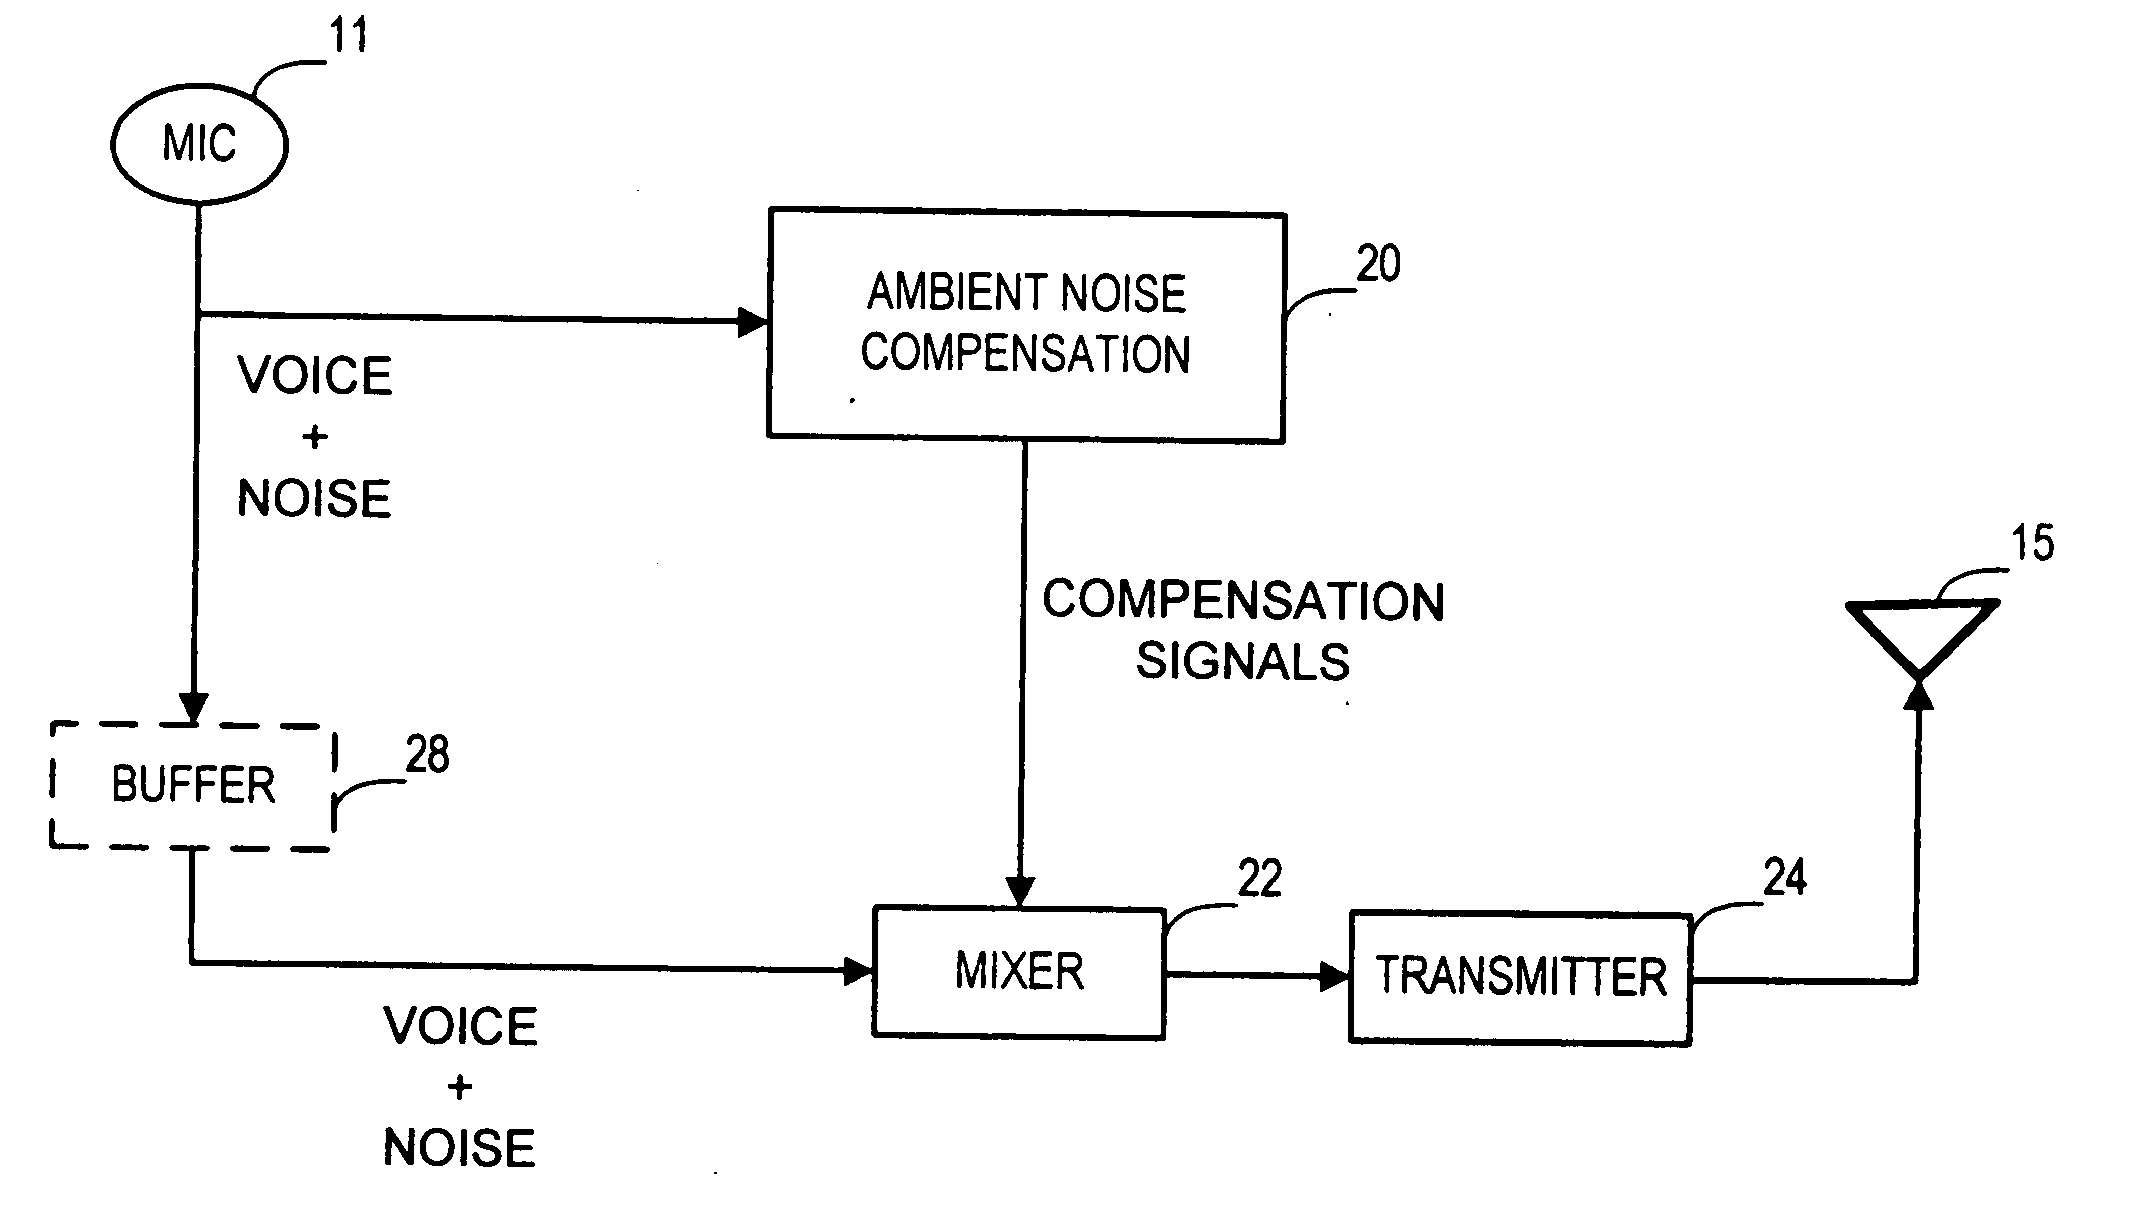 Ambient noise cancellation for voice communication device